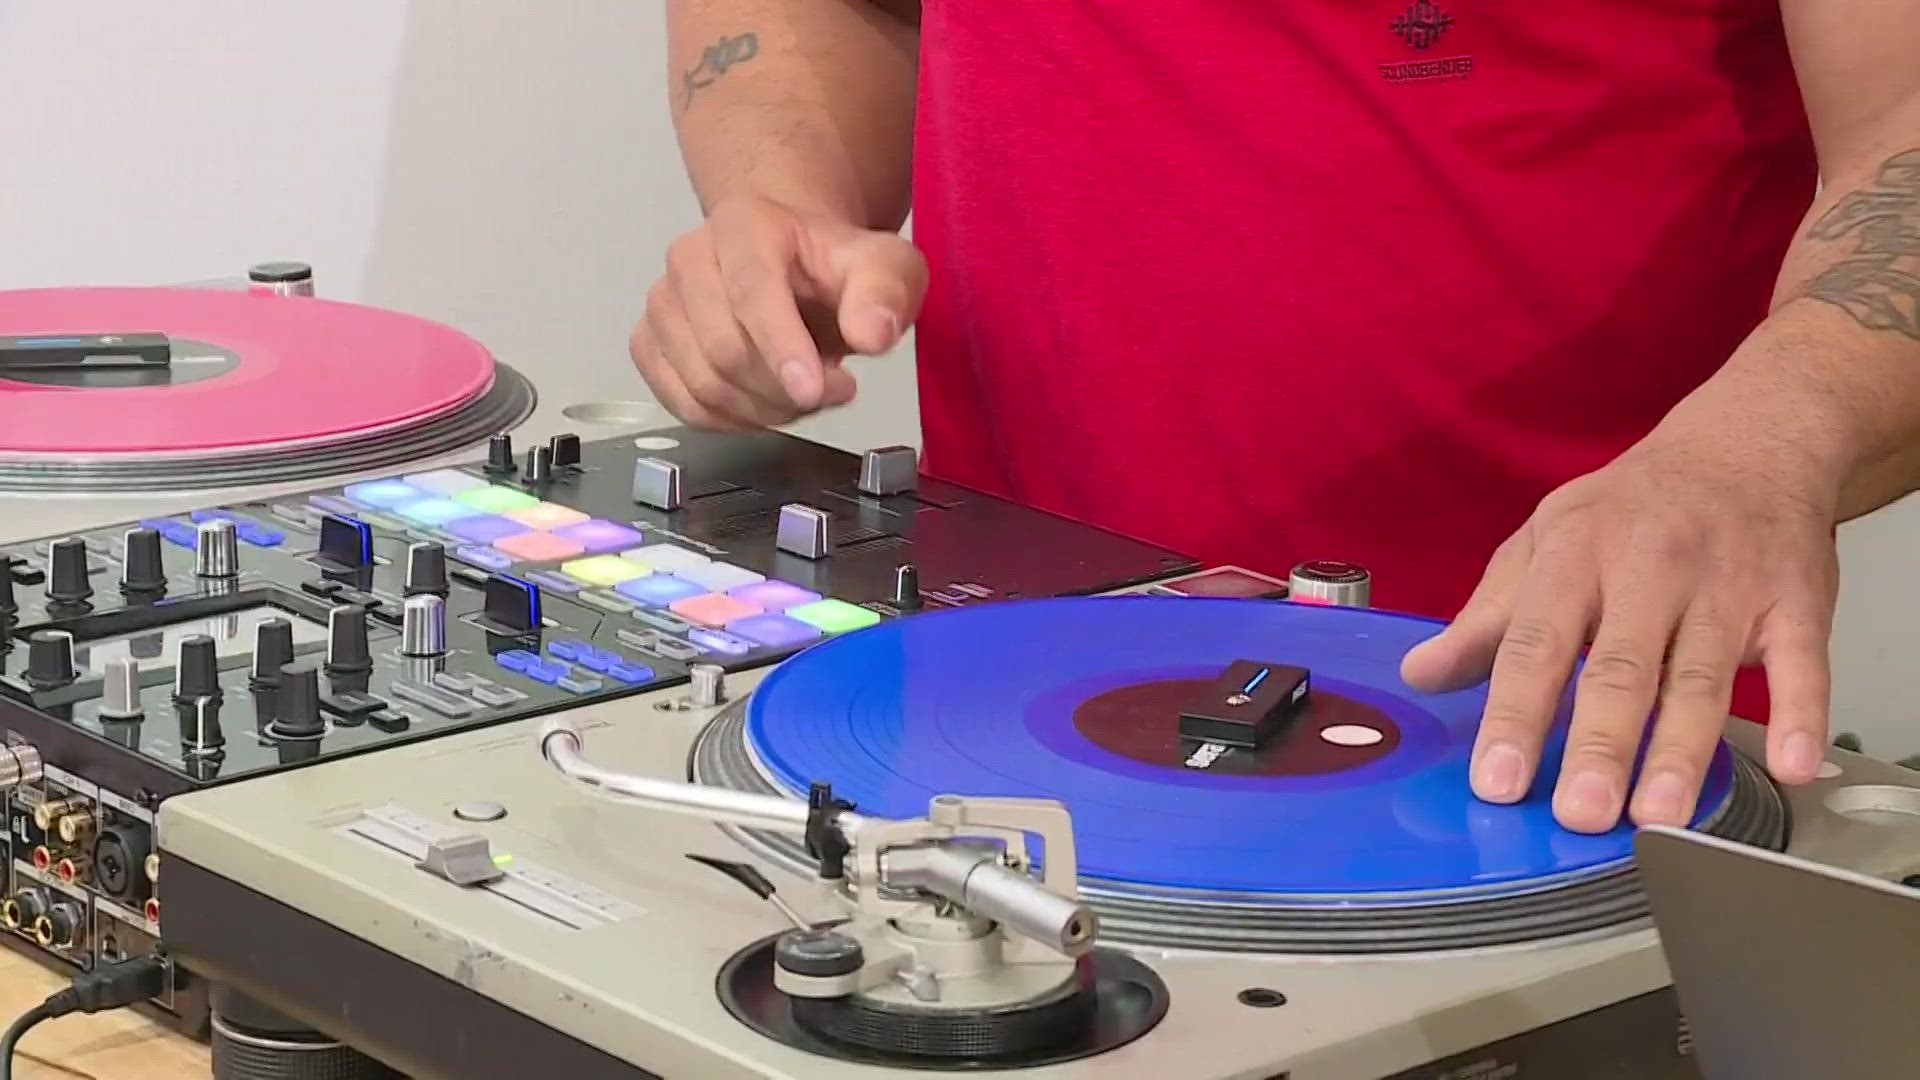 3News' Kierra Cotton visited SoundBender Institute, where they are aiming to teach the next generation of DJs.